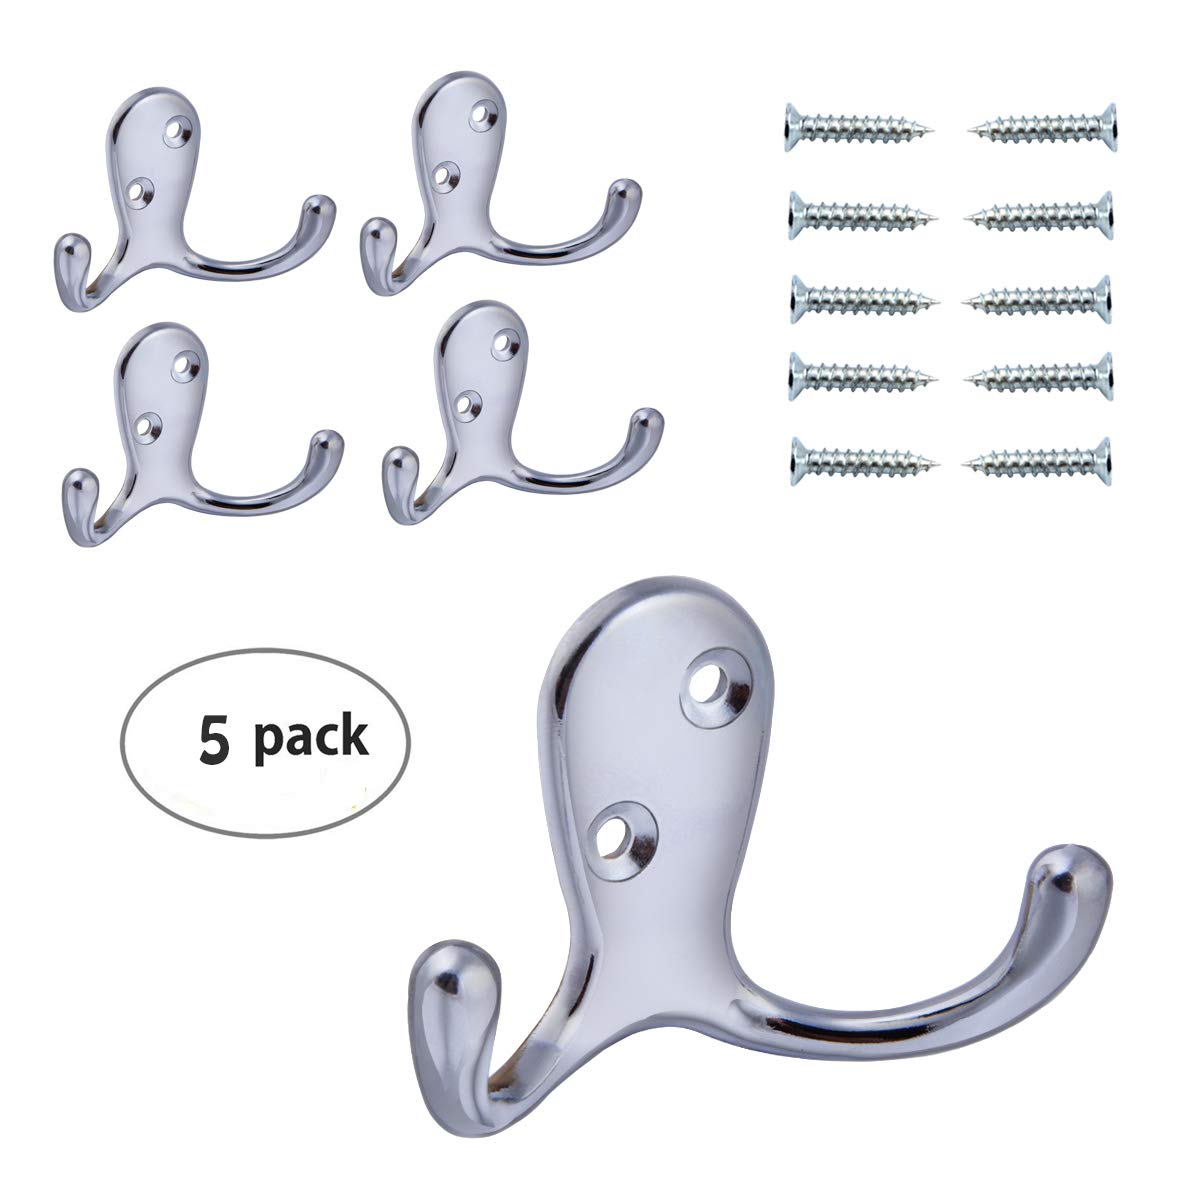 Wall Hooks Double Prong Robe Hook Rustic Hooks Retro Clothes Hanger Coat Hanger Wall Mounted Hook with Screws 5 Pack (Silver)